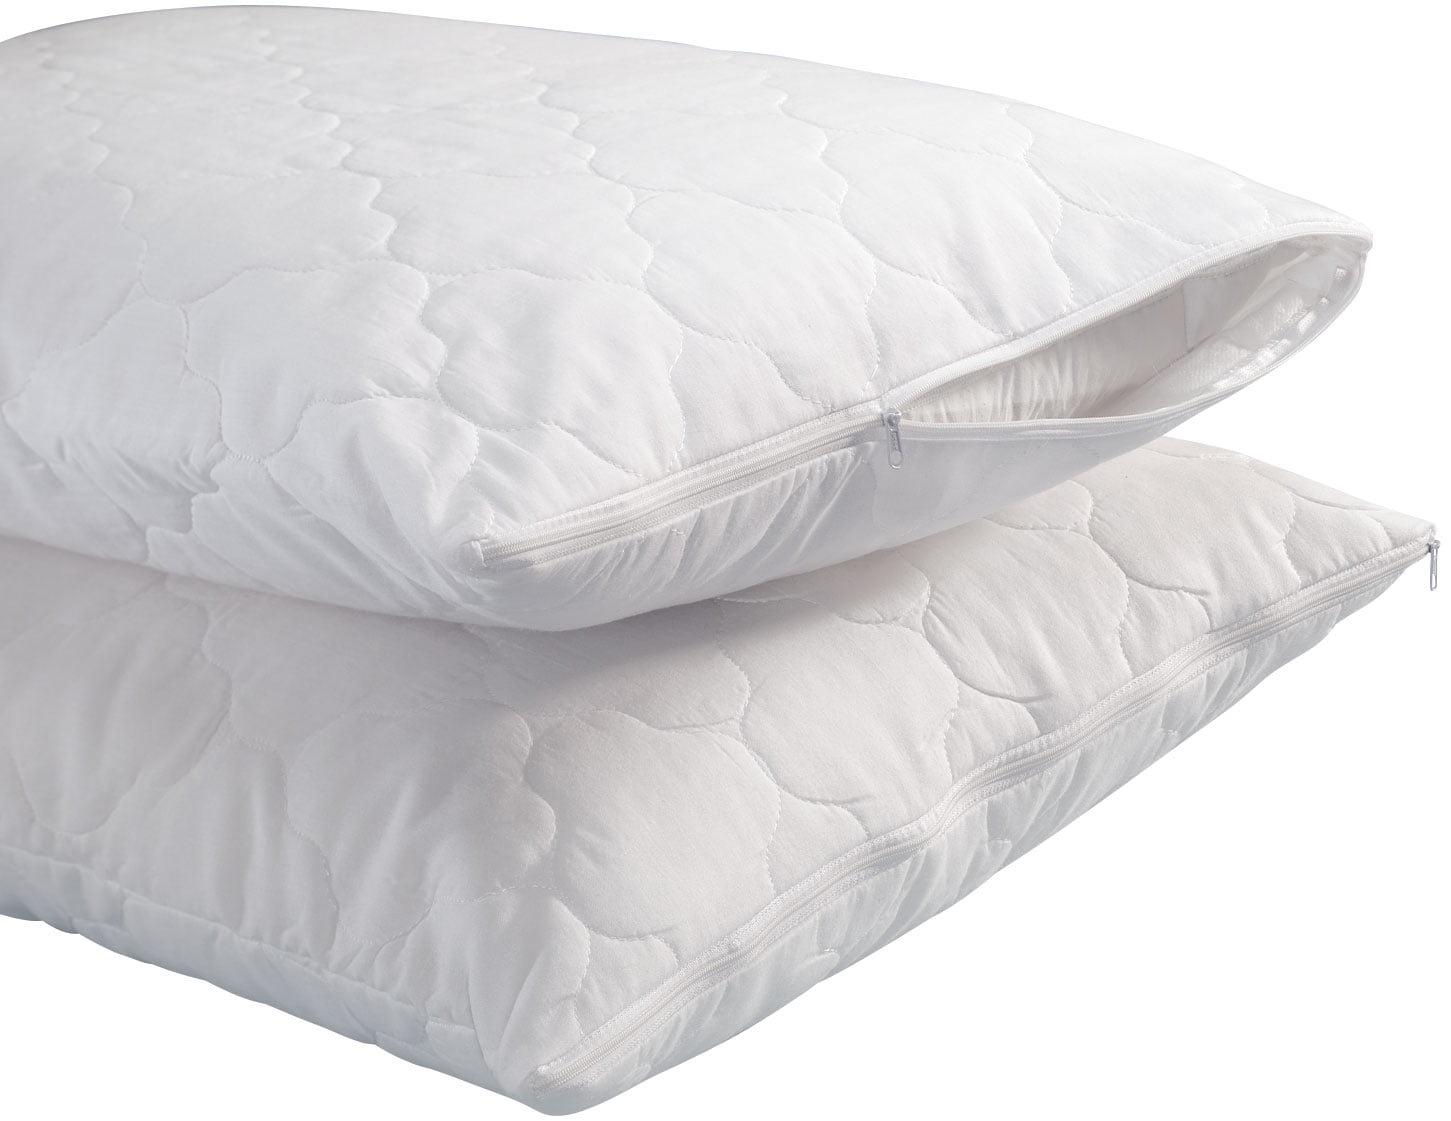 Quilted Pillow Covers, Cotton and Polyester, Zippered Closures, Padded Design for Extra Cushion, Home Décor, White - Set of 2, King Size - Walmart.com